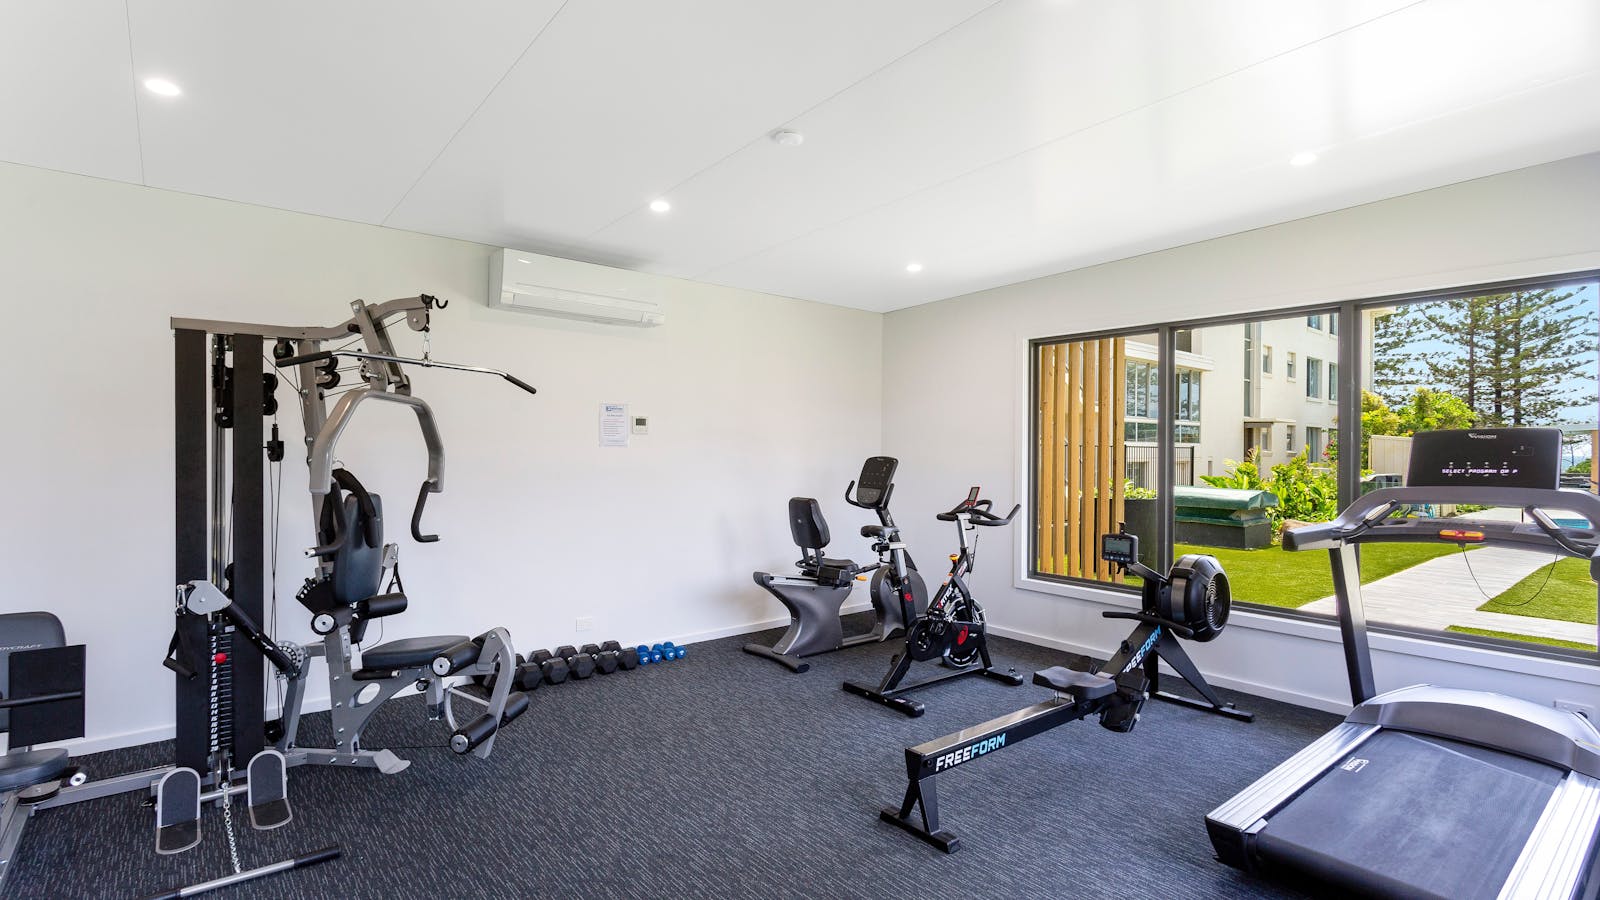 AirConditioned Gymnasium - Great for the health person or the person over indulging on their holiday